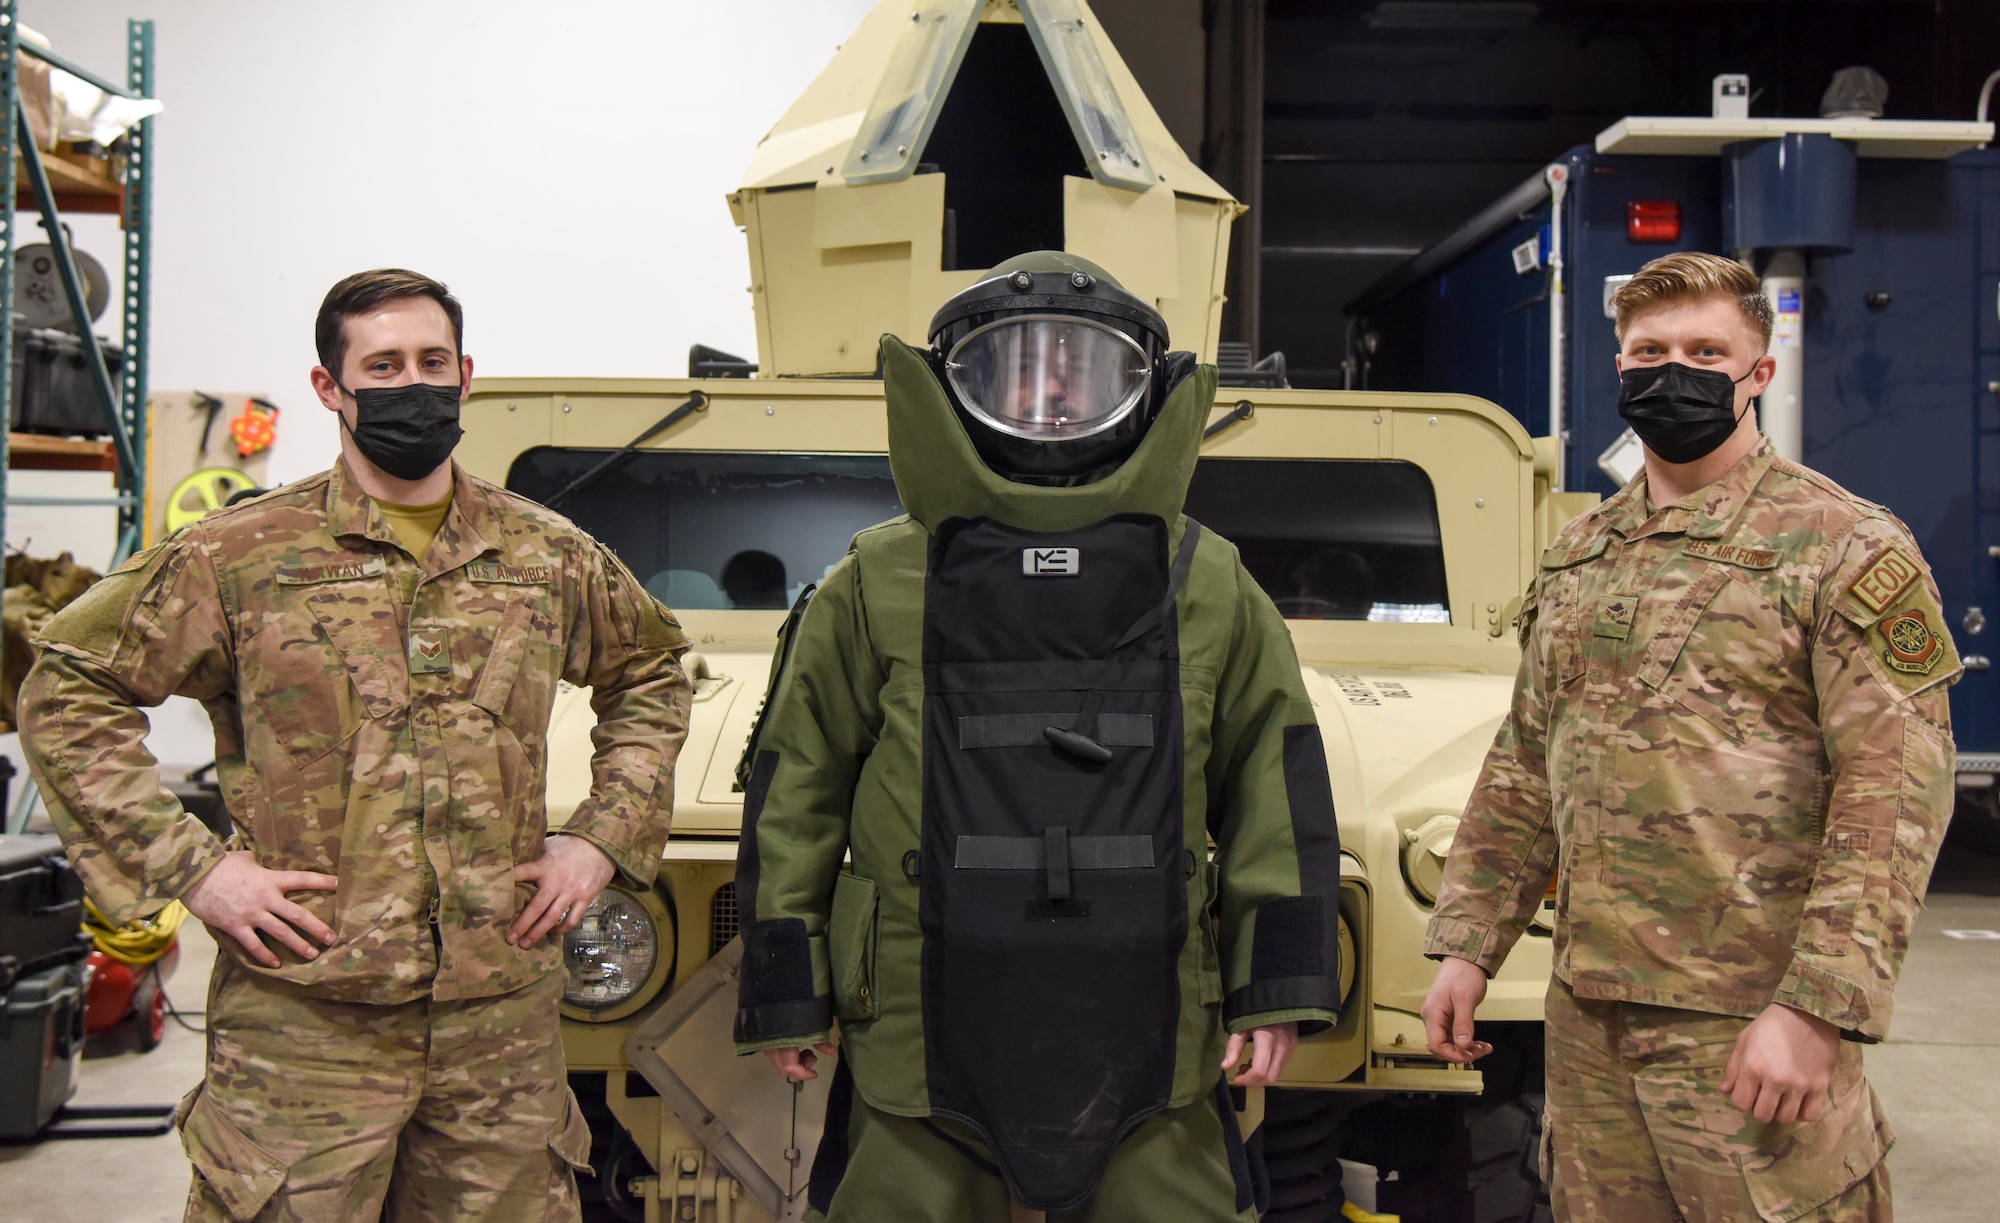 U.S. Air Force Senior Airman Charles Kirwan (left), Airman 1st Class Travis Callahan (middle) and Airman 1st Class Kyle Riley, 92nd Civil Engineer Squadron Explosive Ordnance Disposal technicians, pose for a photo at Fairchild Air Force Base, Washington, Feb. 16, 2021. Fairchild’s EOD emergency response spans an 85-thousand square mile radius supporting federal and local law enforcement agencies throughout Washington, Northern Idaho and select counties in Montana and Oregon. (U.S. Air Force photo by Airman 1st Class Anneliese Kaiser)